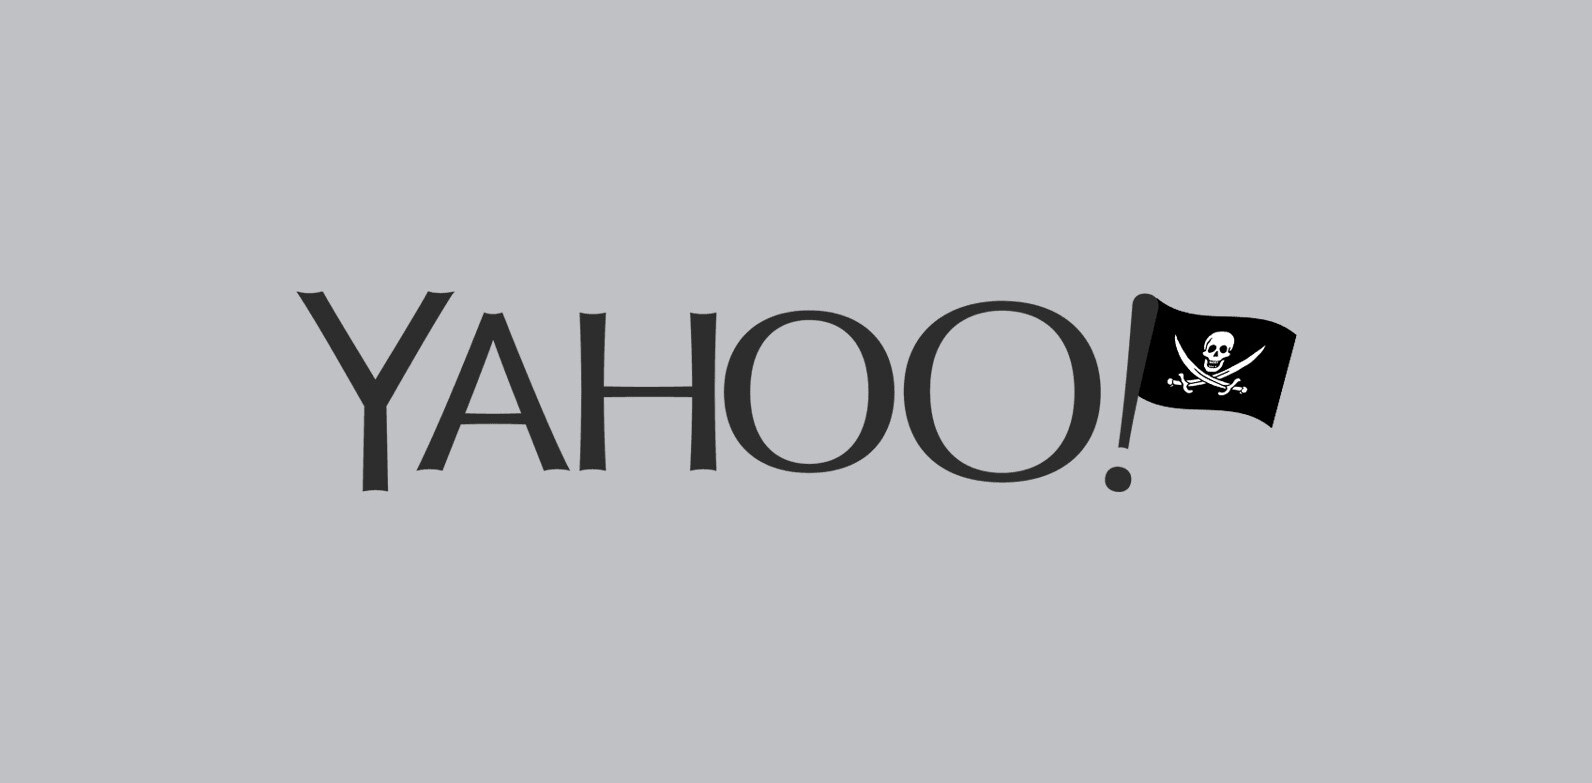 Yahoo confirms 32M accounts hacked as CEO forfeits annual bonus in apology